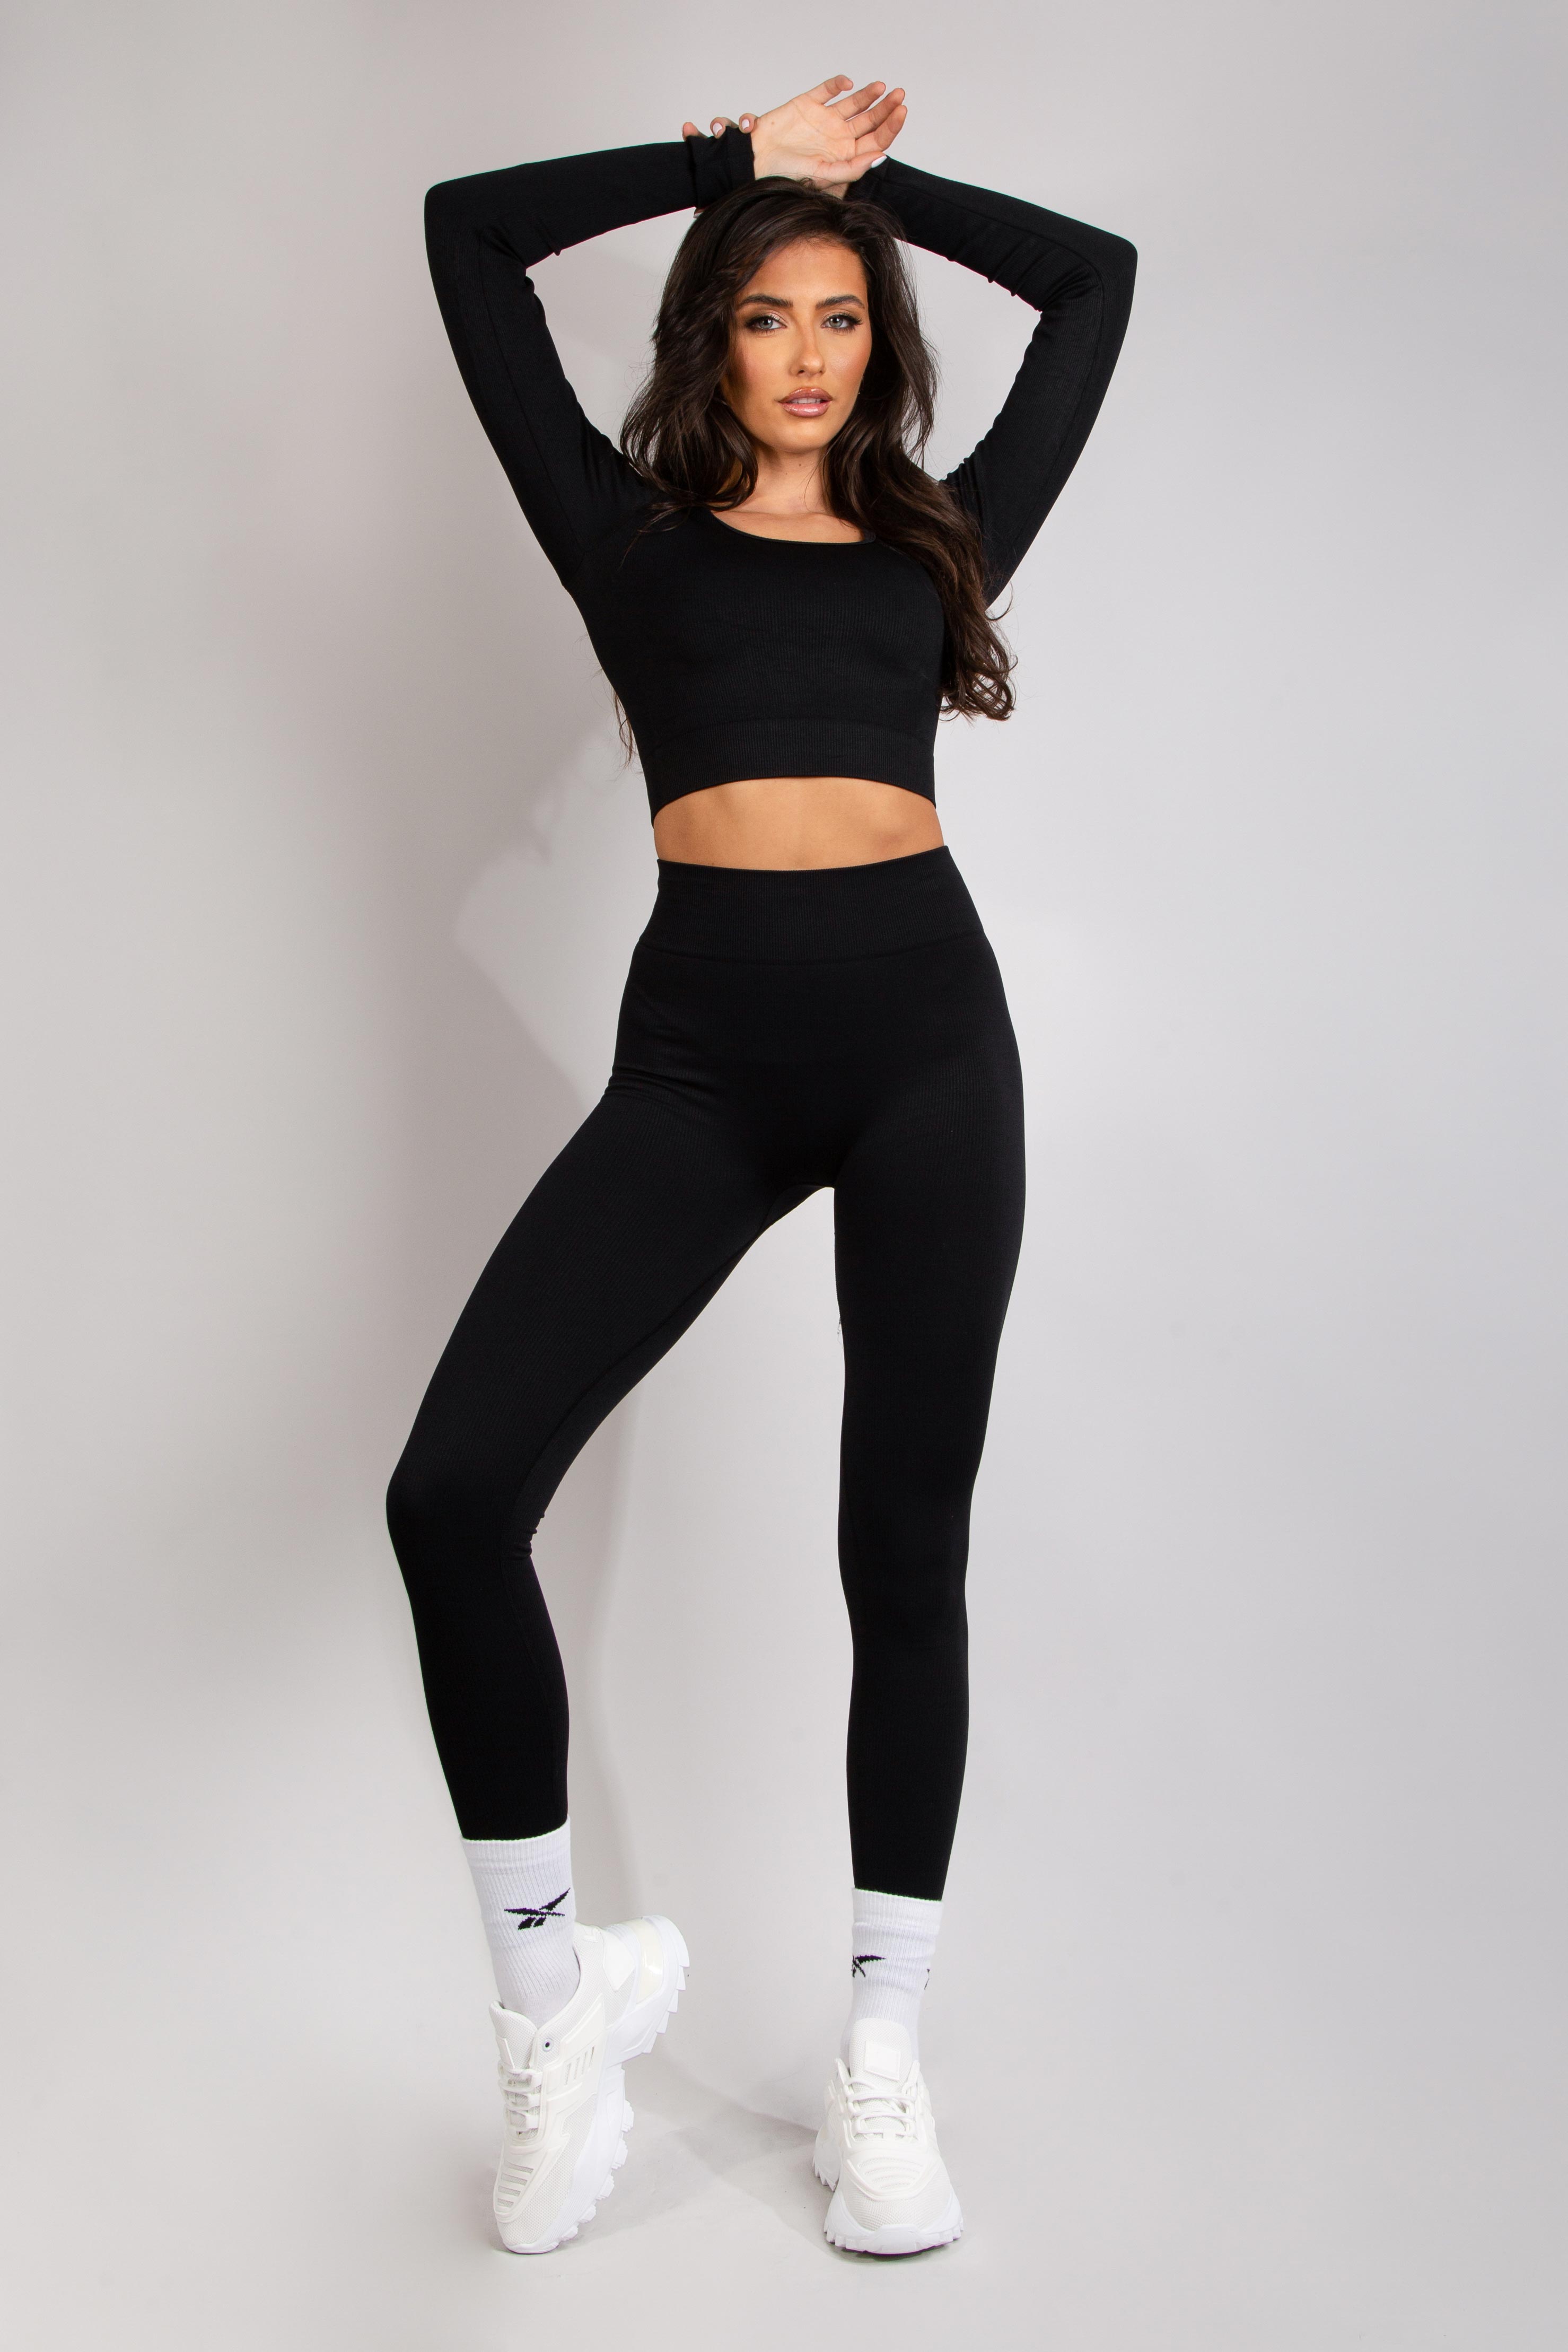 Petite Charcoal Snatched Rib Seamless Leggings